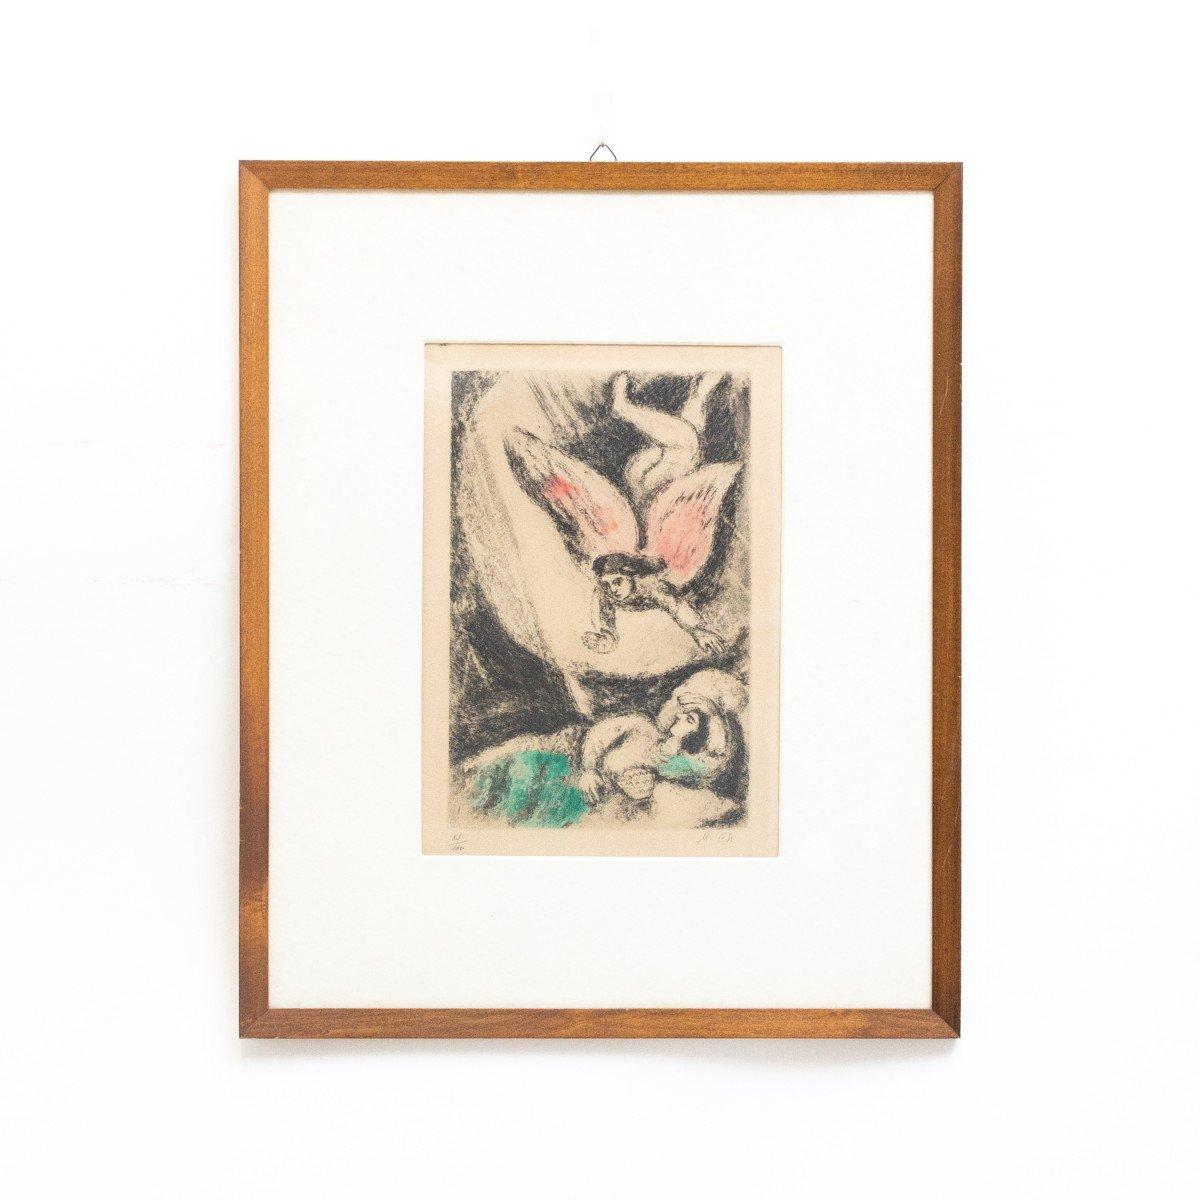 Marc Chagall Figurative Print - The Bible : Salomon, original hand-signed lithograph, limited number edition